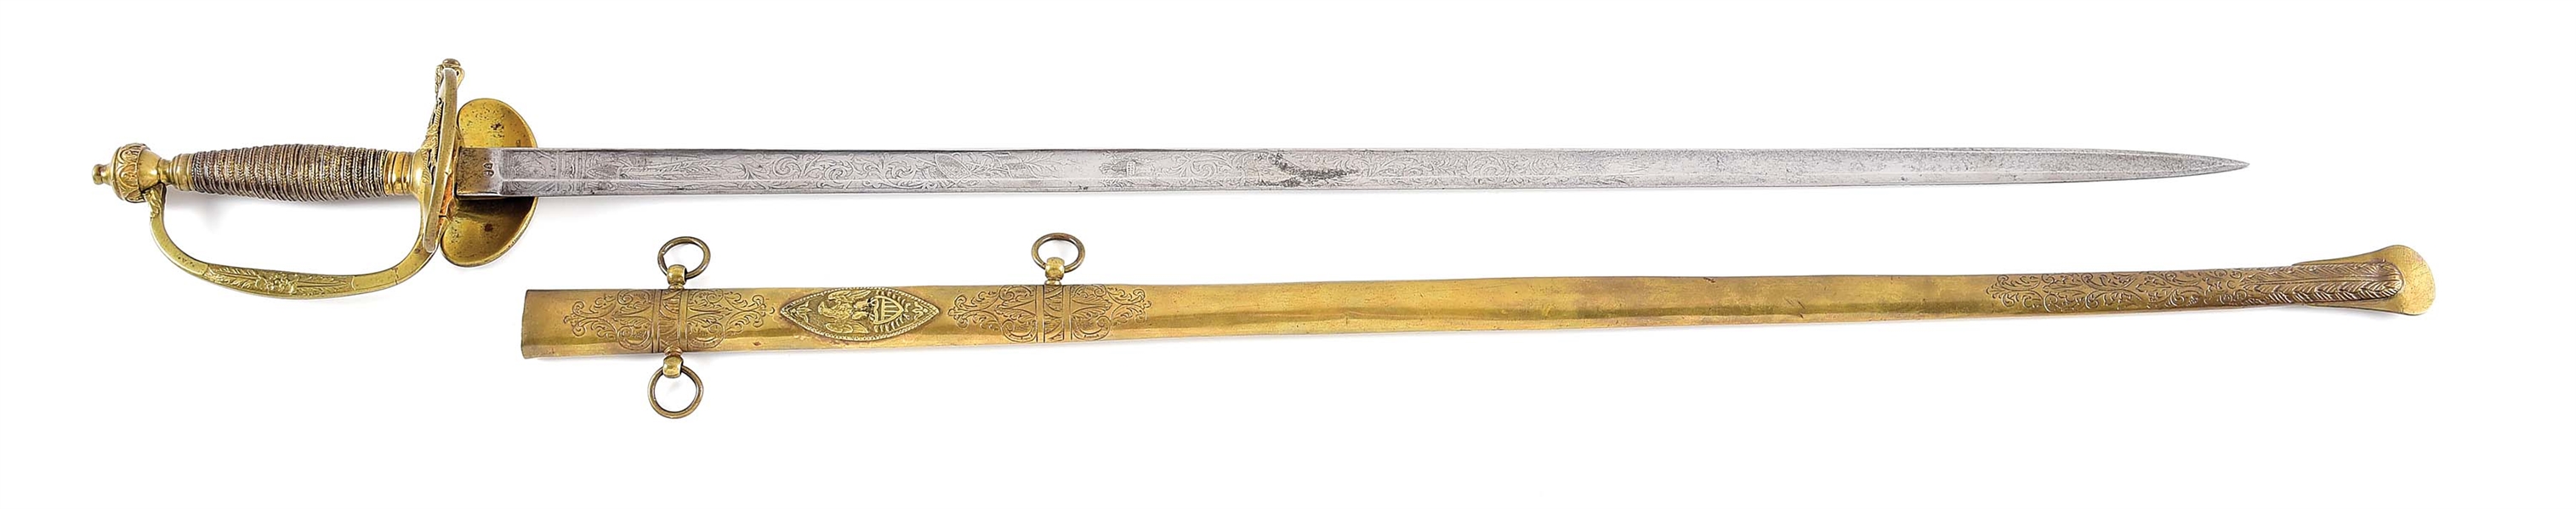 US CIVIL WAR PRESENTATION GRADE 1840 OFFICERS PATTERN SWORD OF COLONEL FRANCIS PETELER, 2ND UNITED STATES SHARP SHOOTERS